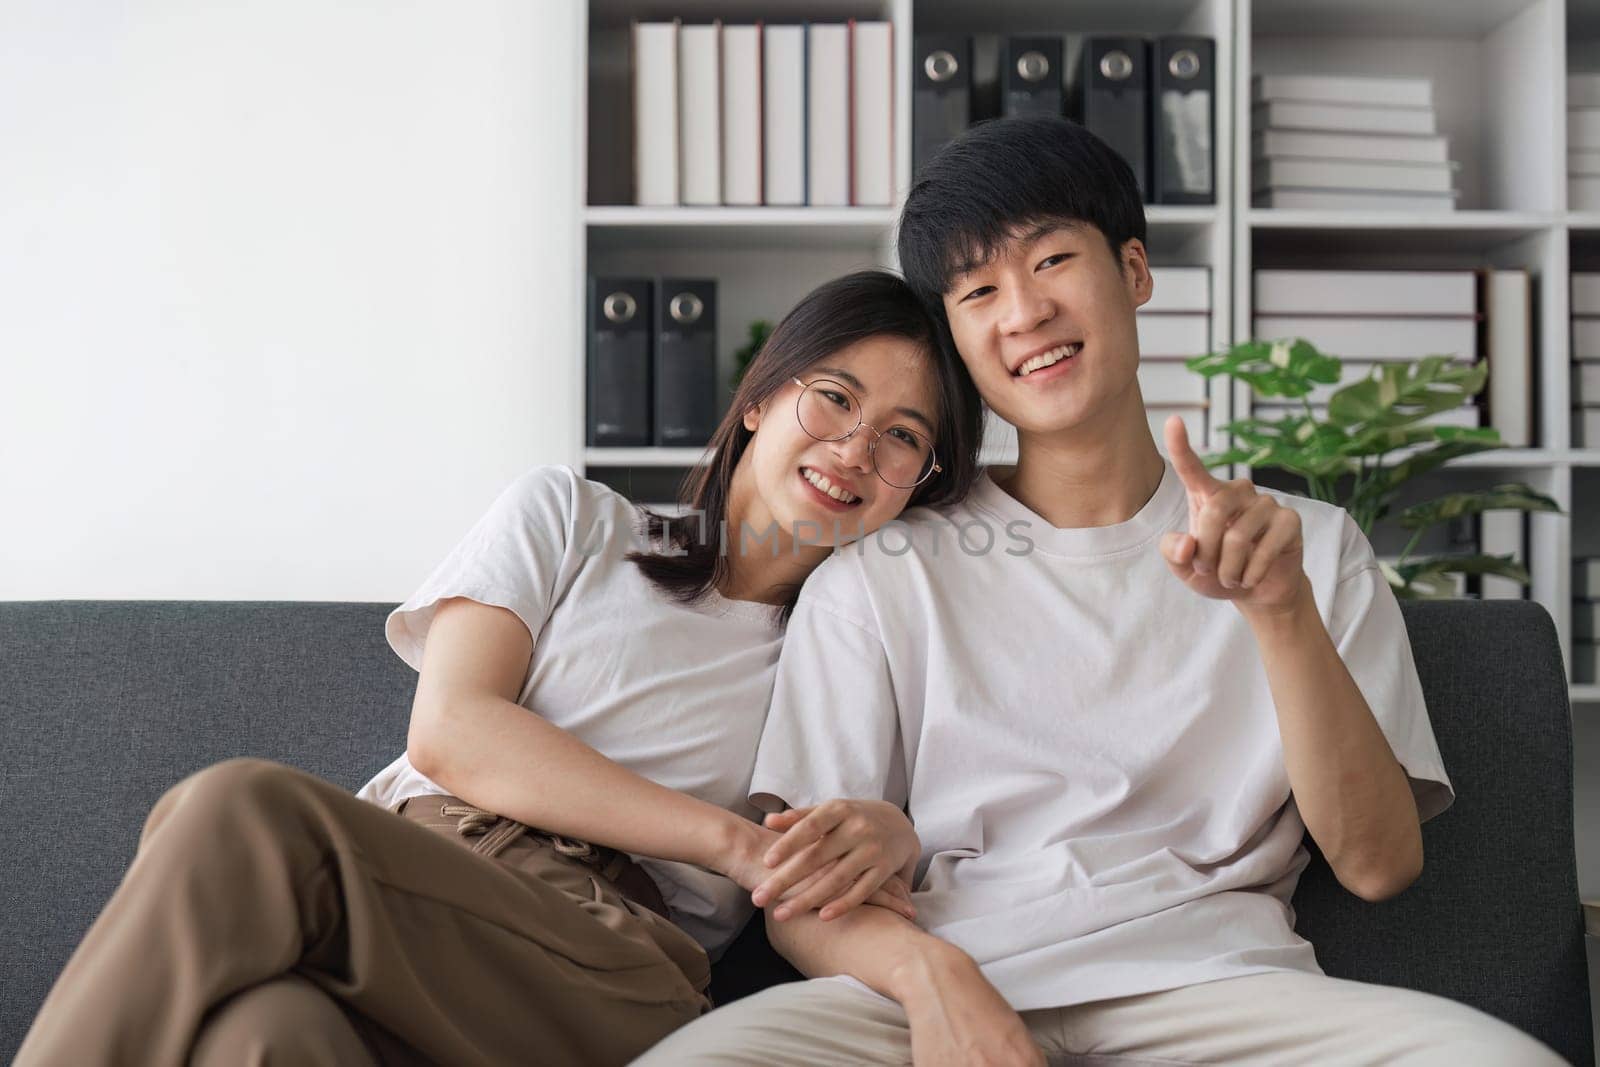 leisure activities. Positive young Asian couple relaxing on sofa, watching TV, enjoying movie together at home.